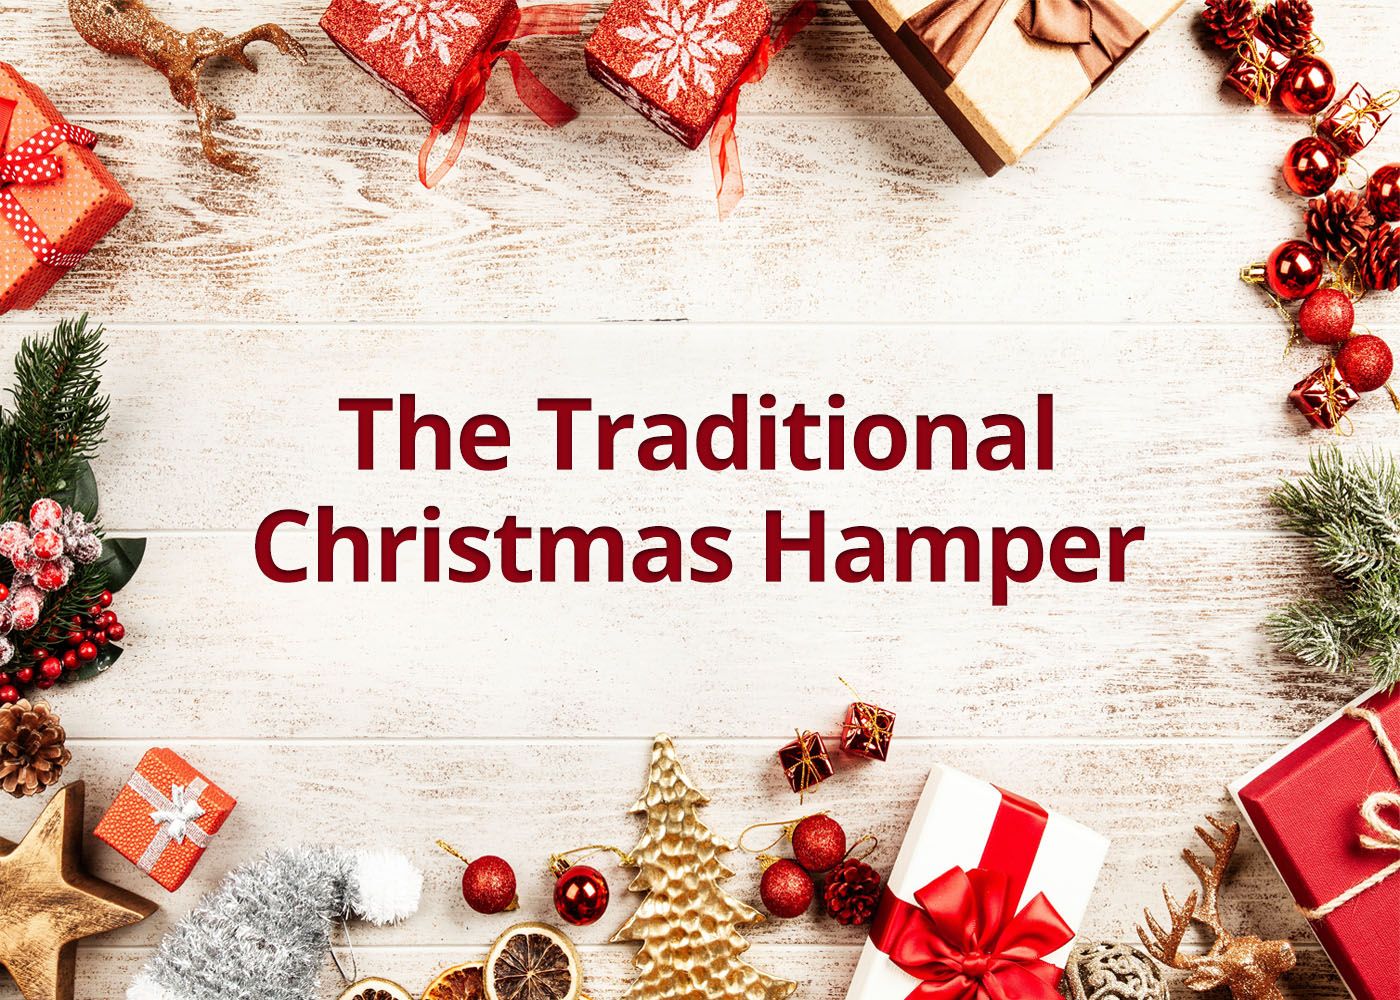 The Traditional Christmas Hamper -  Serves 4